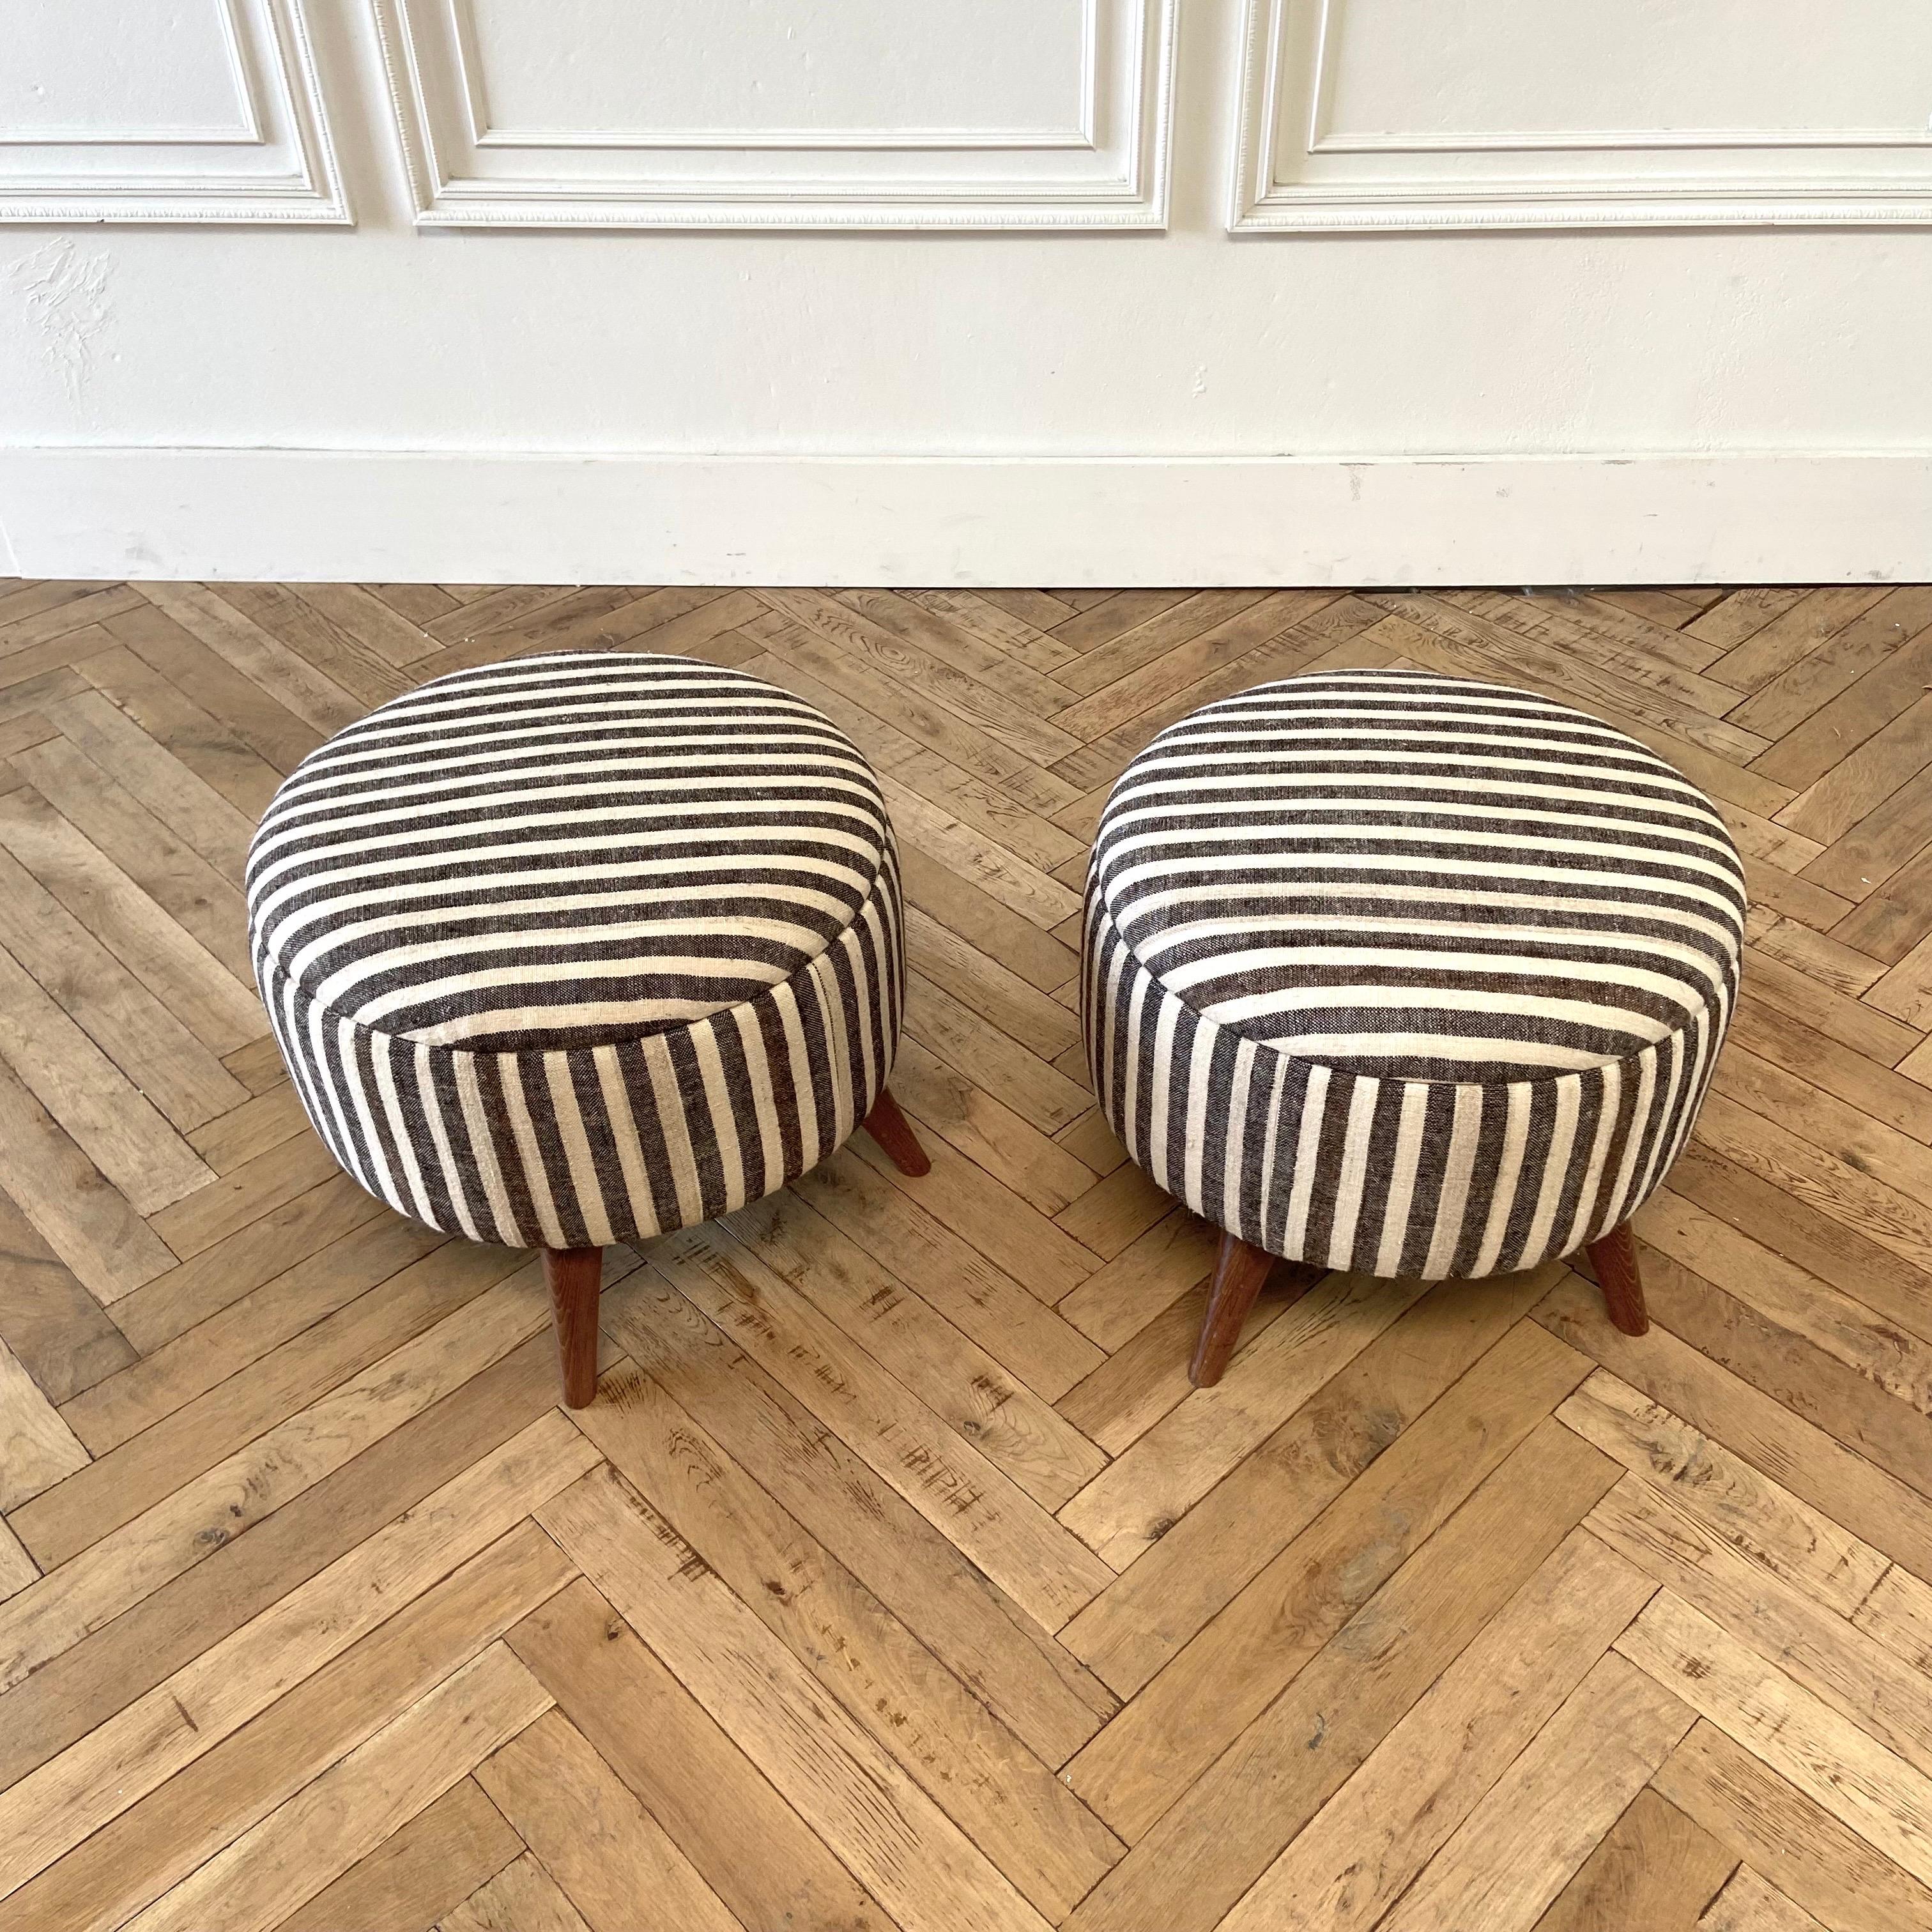 Custom made vintage Turkish rug round ottoman.
Once a stripe rug now a useful cocktail ottoman. one of a kind items.
These ottomans have been created from vintage textile rugs from Turkey.
Wood legs are in a walnut finish.
Sold as a set.
Size: